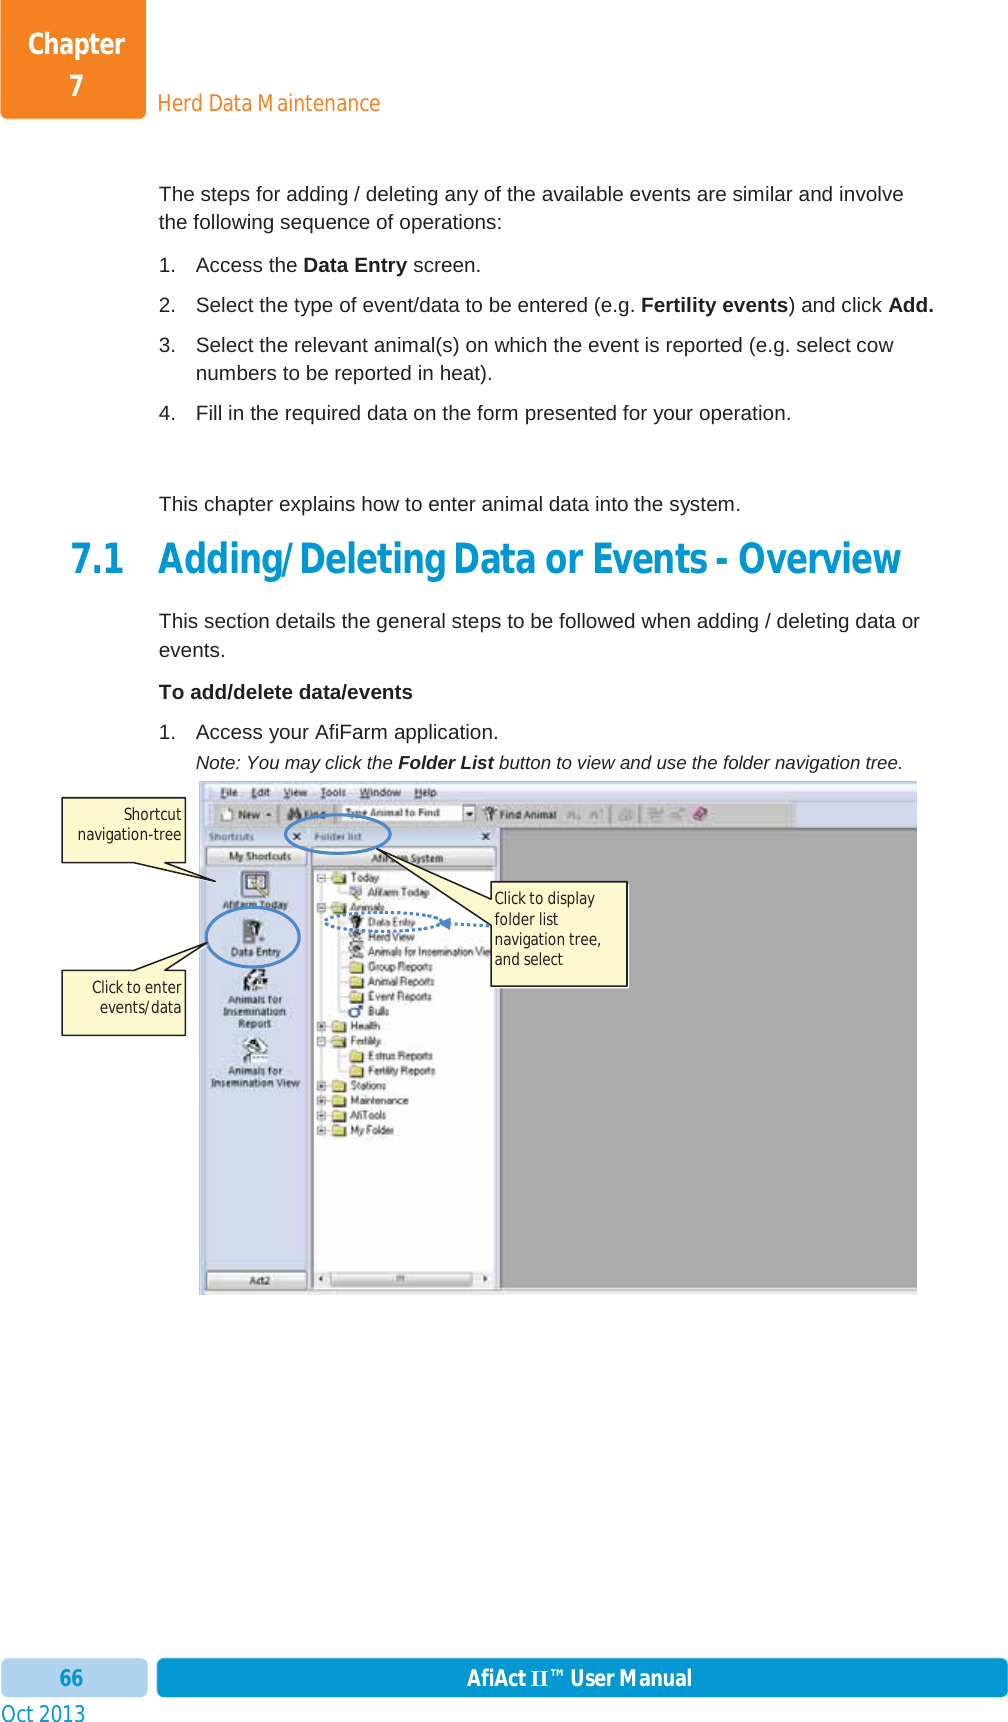 Oct 2013 AfiAct II™ User Manual66Herd Data MaintenanceChapter 7The steps for adding / deleting any of the available events are similar and involve the following sequence of operations: 1. Access the Data Entry screen. 2.  Select the type of event/data to be entered (e.g. Fertility events) and click Add.3.  Select the relevant animal(s) on which the event is reported (e.g. select cow numbers to be reported in heat). 4.  Fill in the required data on the form presented for your operation. This chapter explains how to enter animal data into the system. 7.1 Adding/Deleting Data or Events - Overview This section details the general steps to be followed when adding / deleting data or events. To add/delete data/events  1.  Access your AfiFarm application.  Note: You may click the Folder List button to view and use the folder navigation tree. Shortcut navigation-tree Click to display folder list navigation tree, and select  Click to enter events/data 